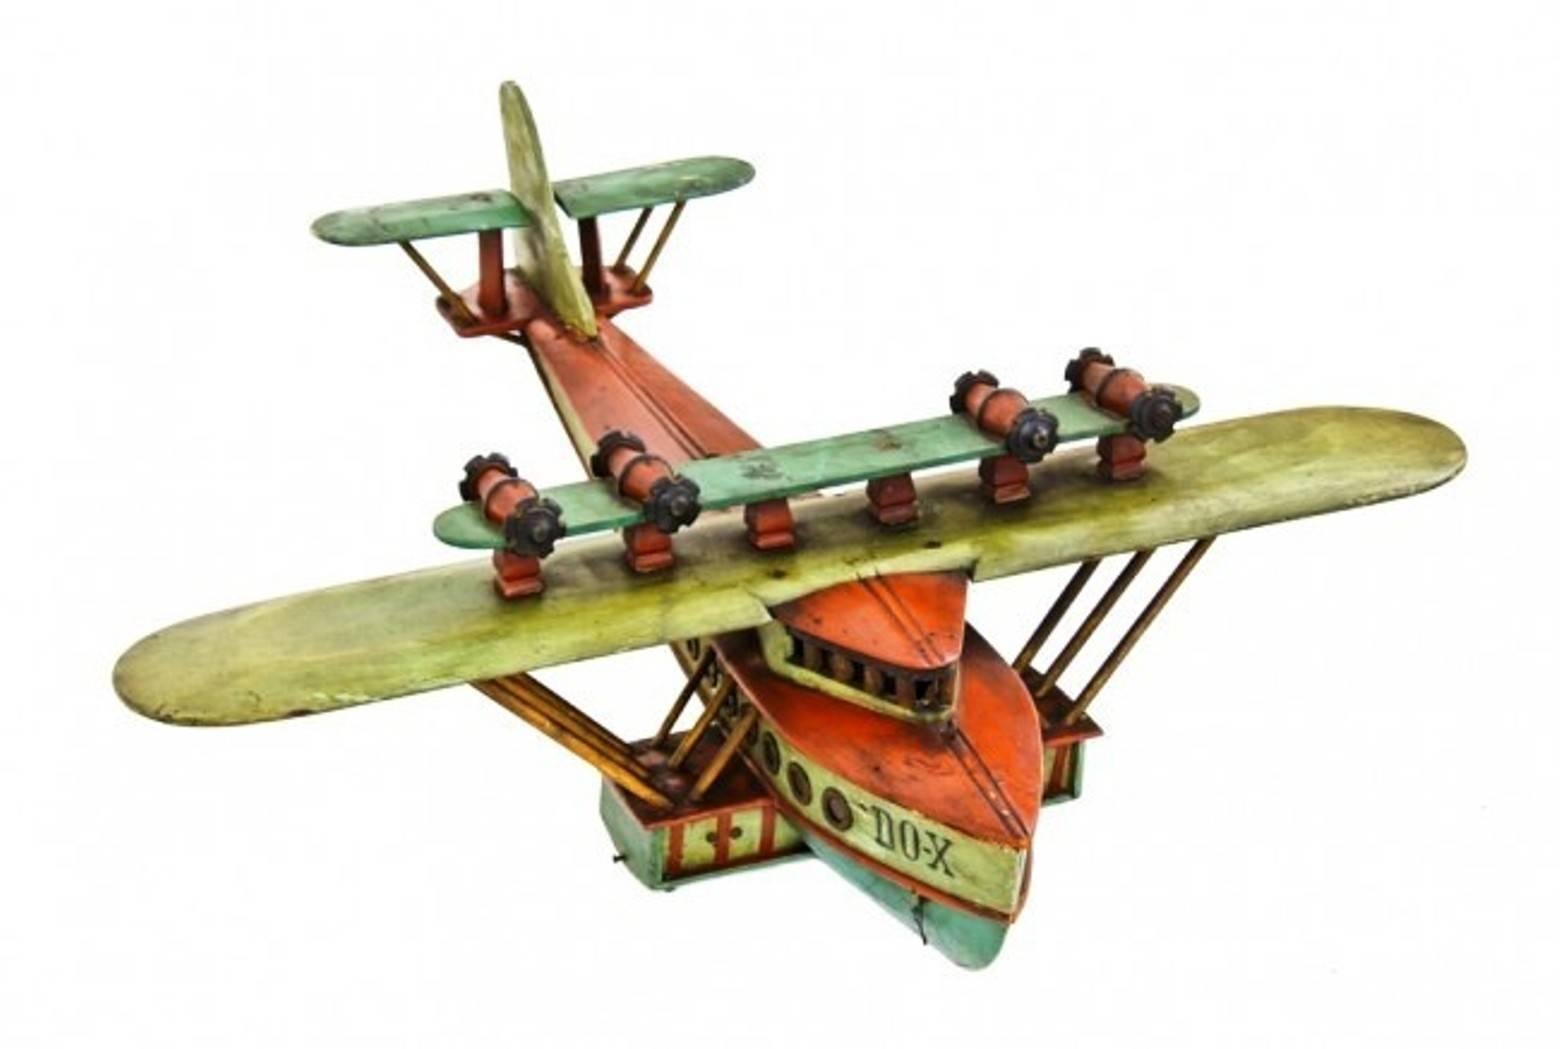 Stunning all original, circa 1930s skilfully crafted American Folk Art dornier do x model airplane or flying boat discovered on the south side of Chicago. Very little is known about the Chicago-based artist who created this remarkably detailed